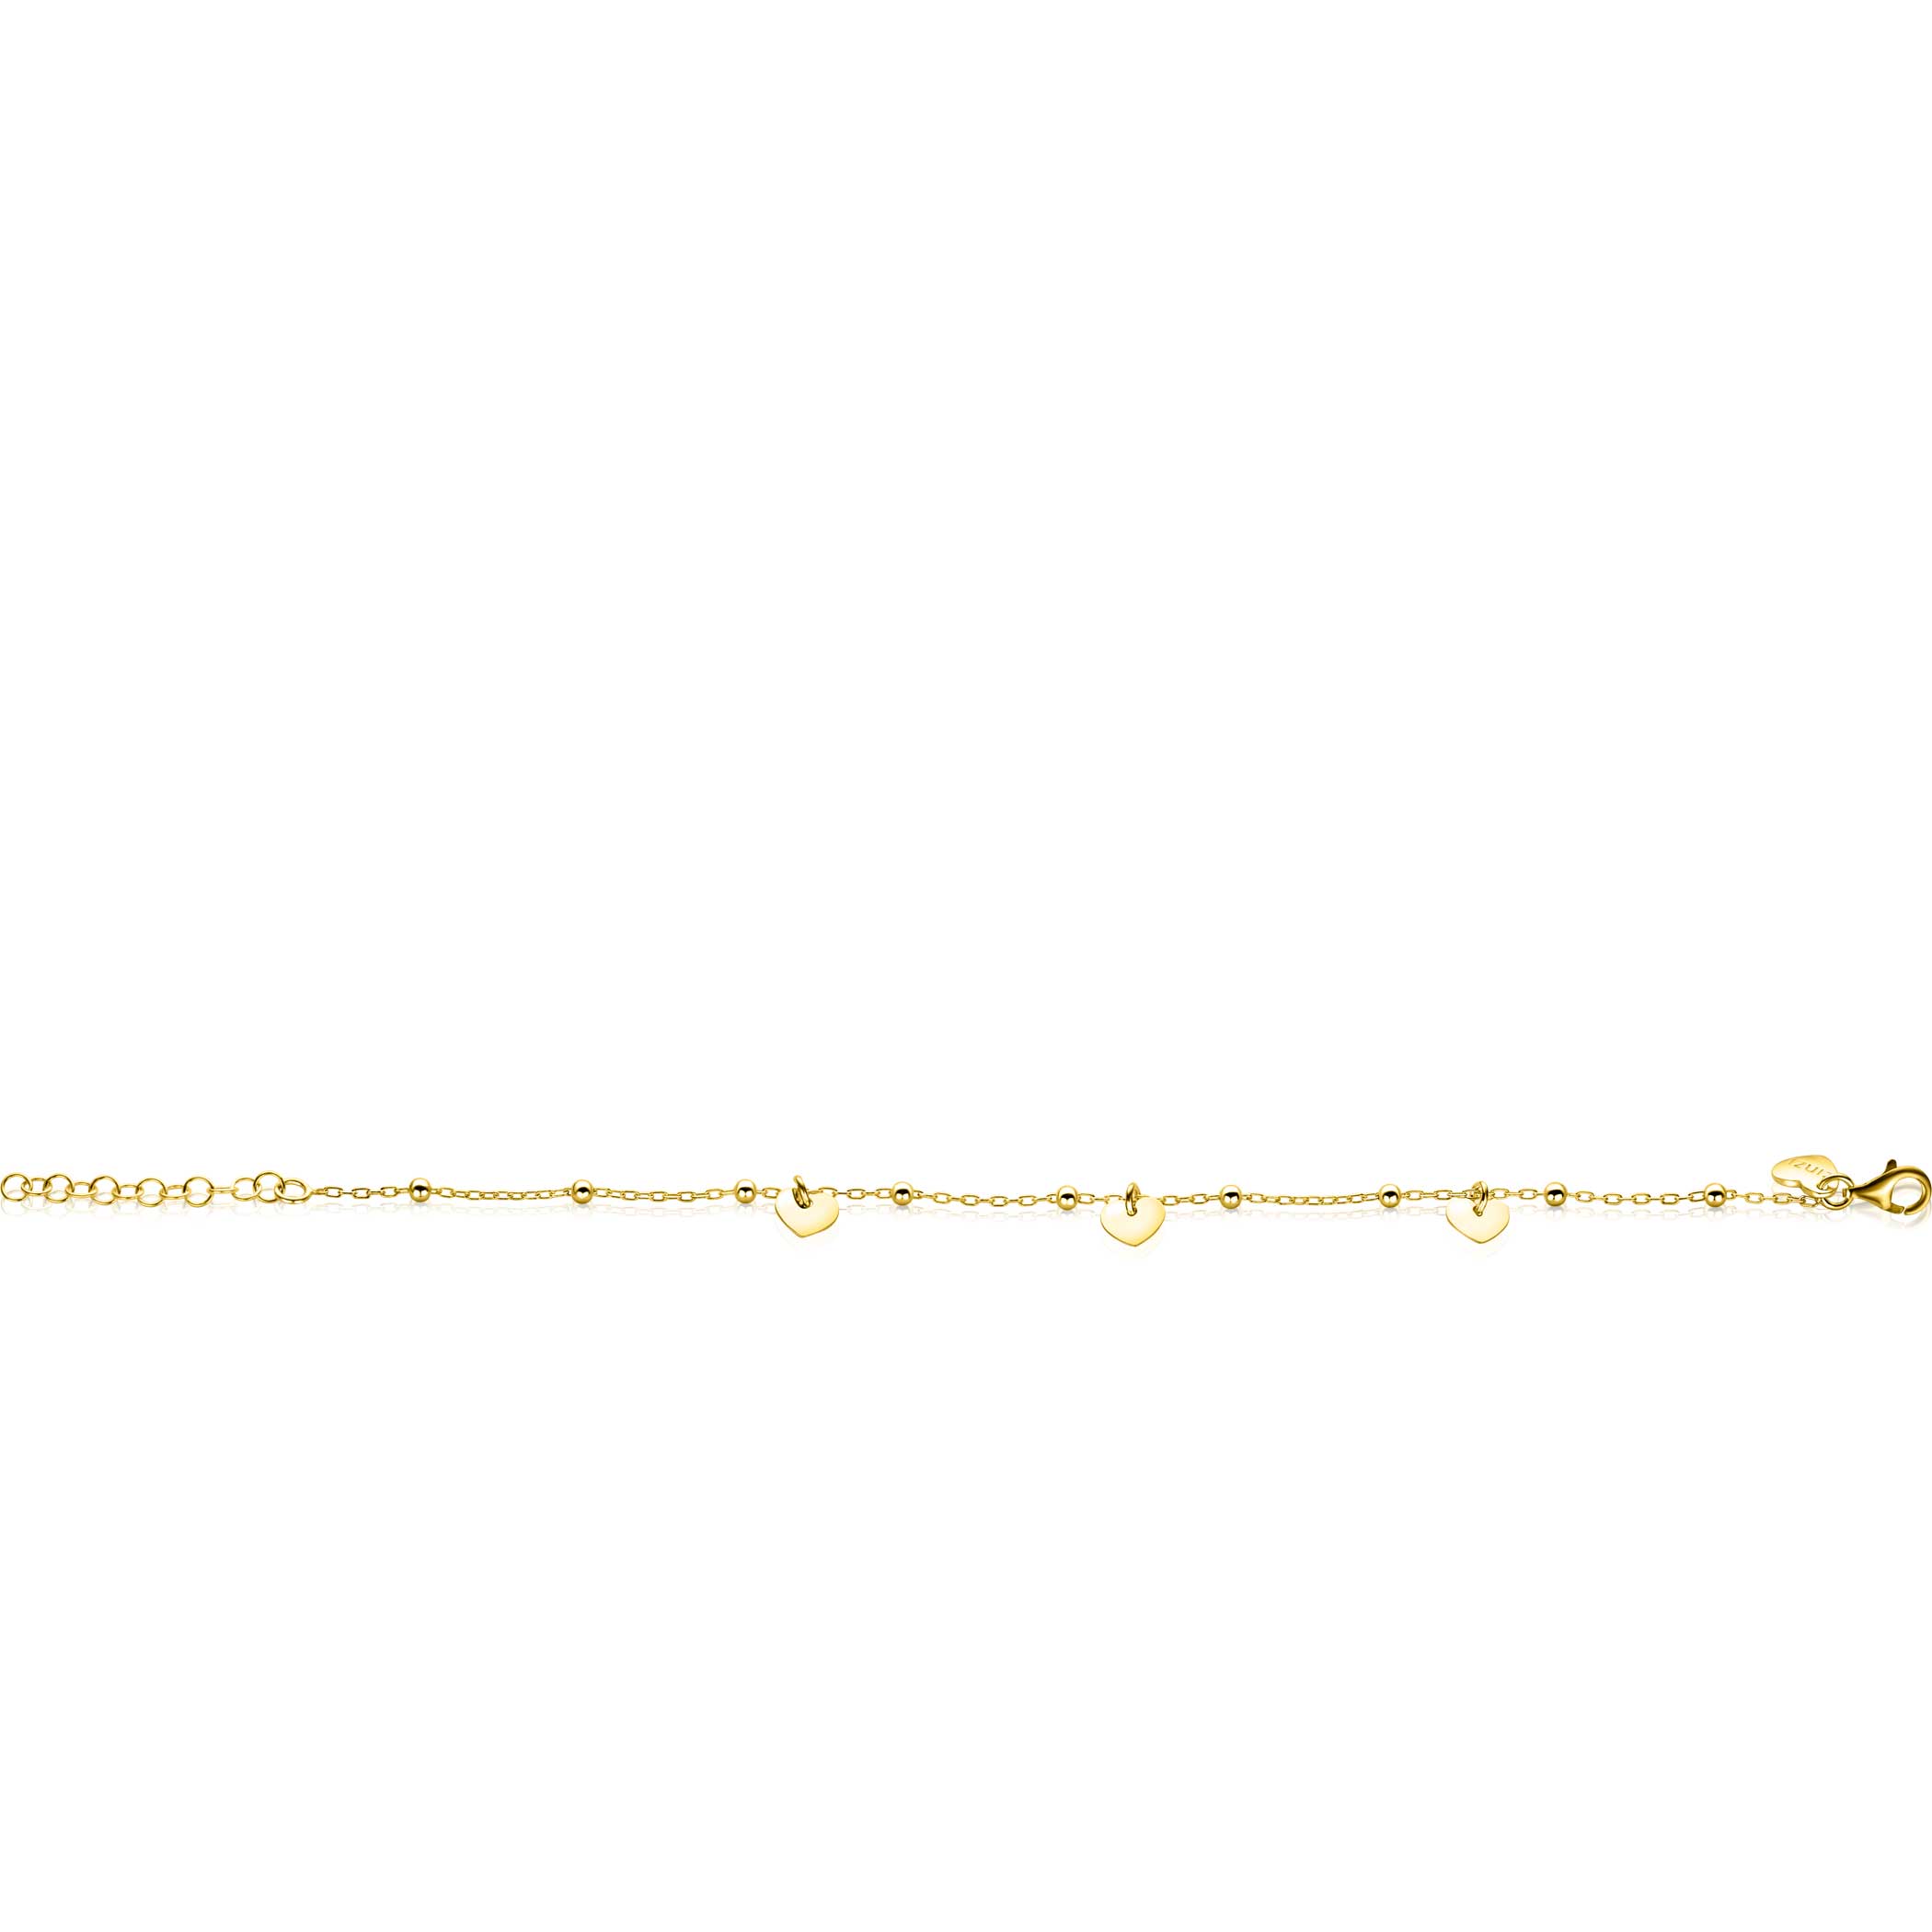 ZINZI Gold Plated Sterling Silver Chain Bracelet with Beads and 3 Shiny Heart Charms 17-20cm ZIA2531G